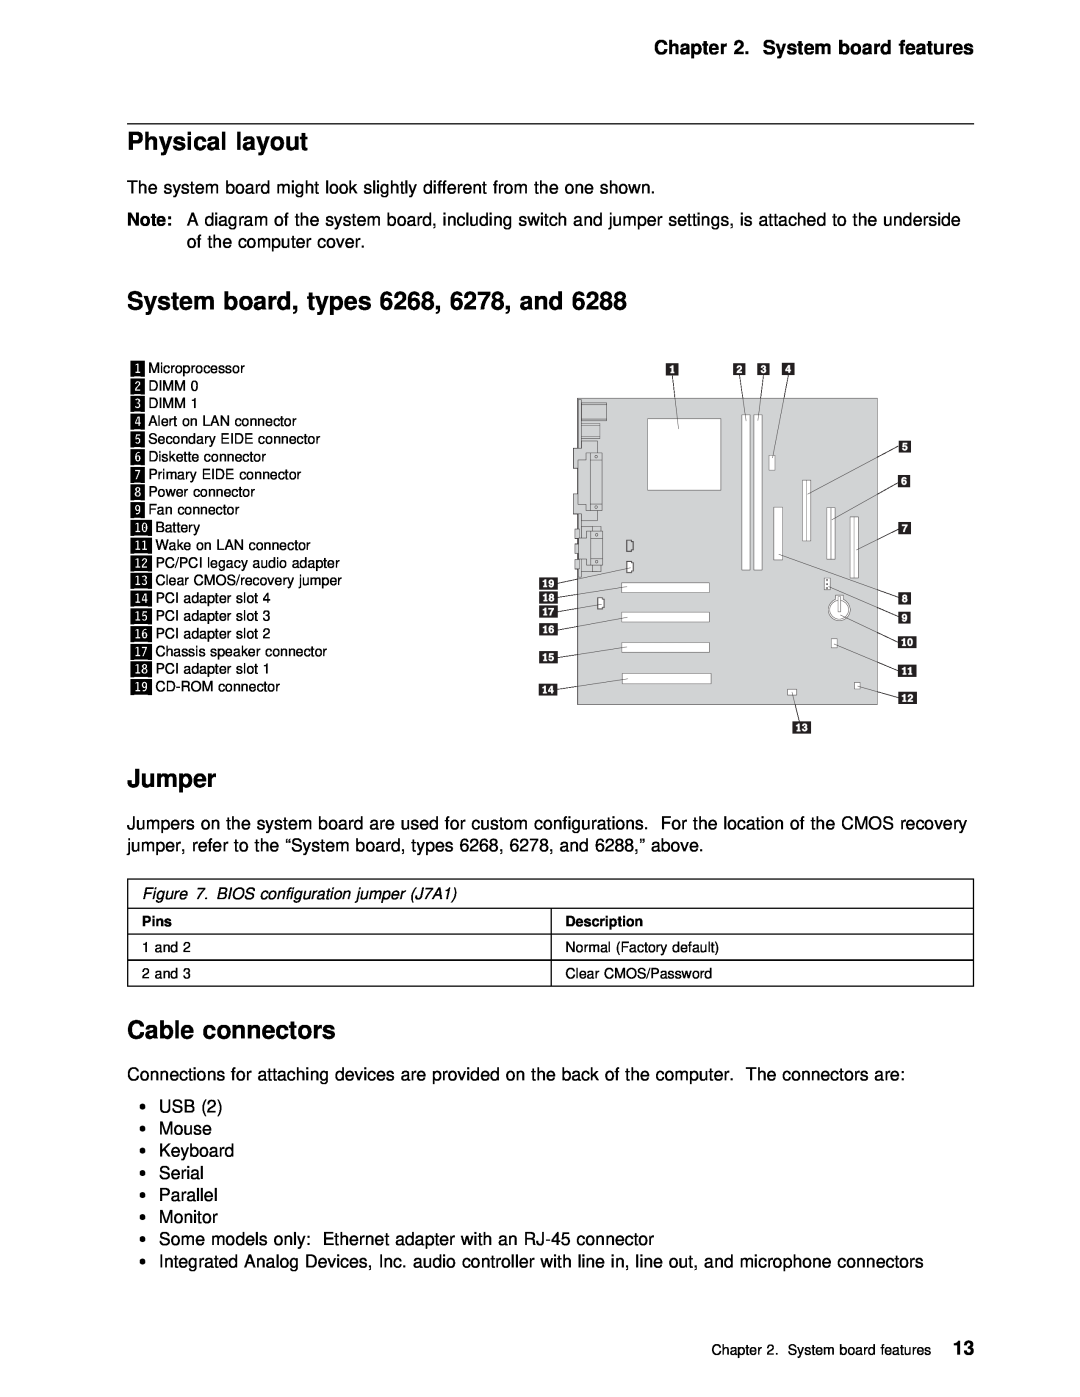 IBM 6288 manual Physical layout, Jumper, Cable connectors, types 6268, 6278, and, System board features 